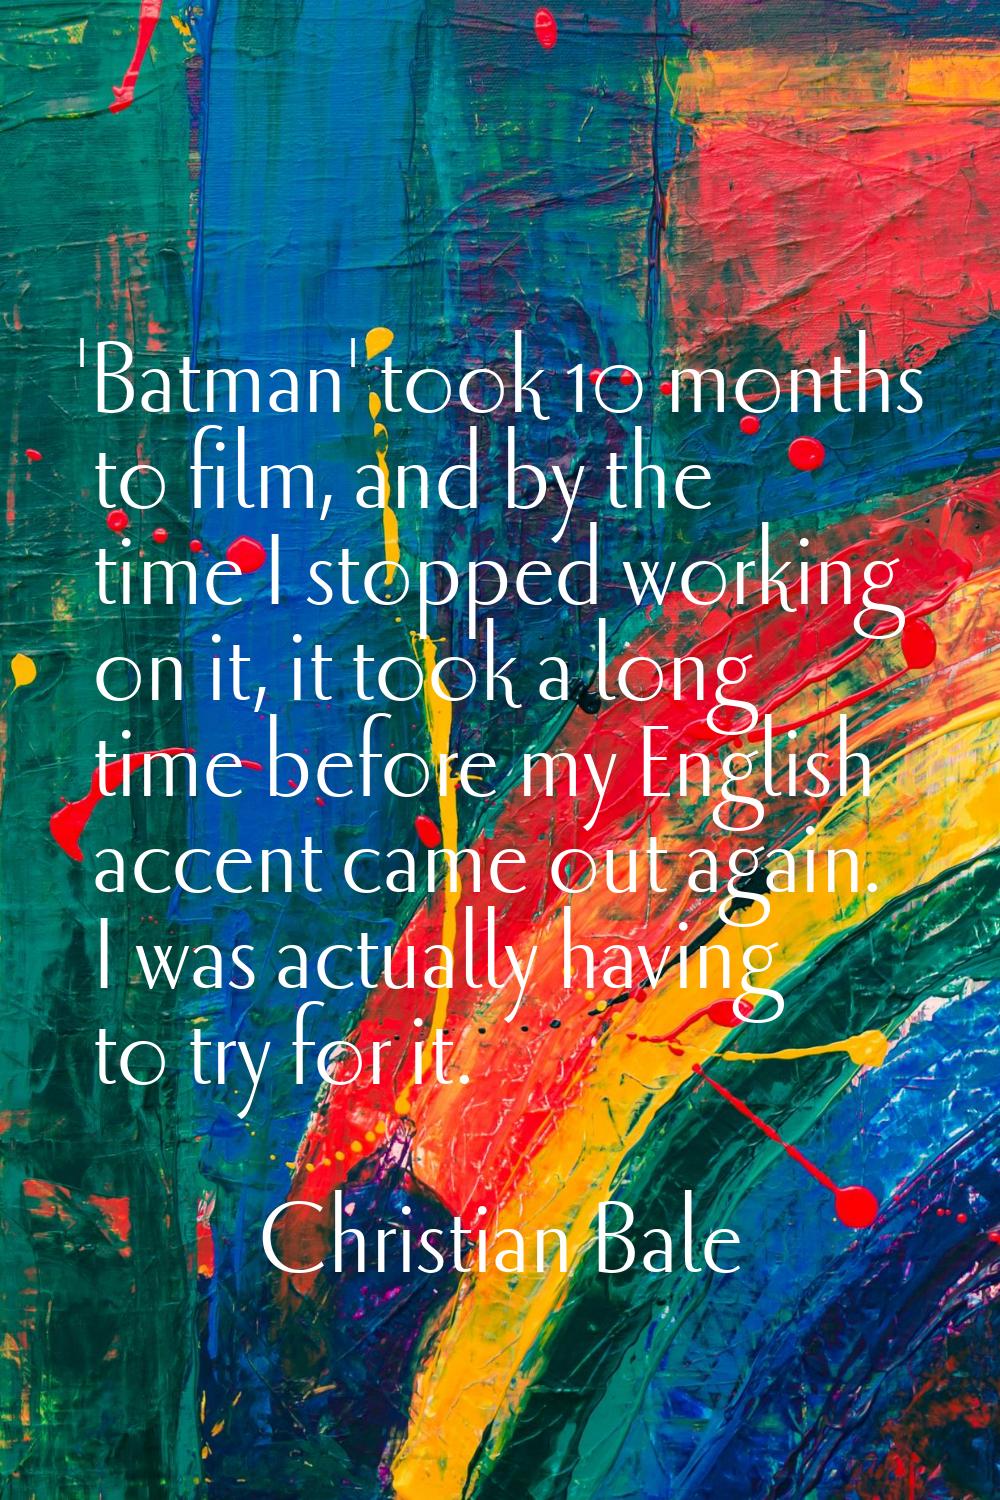 'Batman' took 10 months to film, and by the time I stopped working on it, it took a long time befor